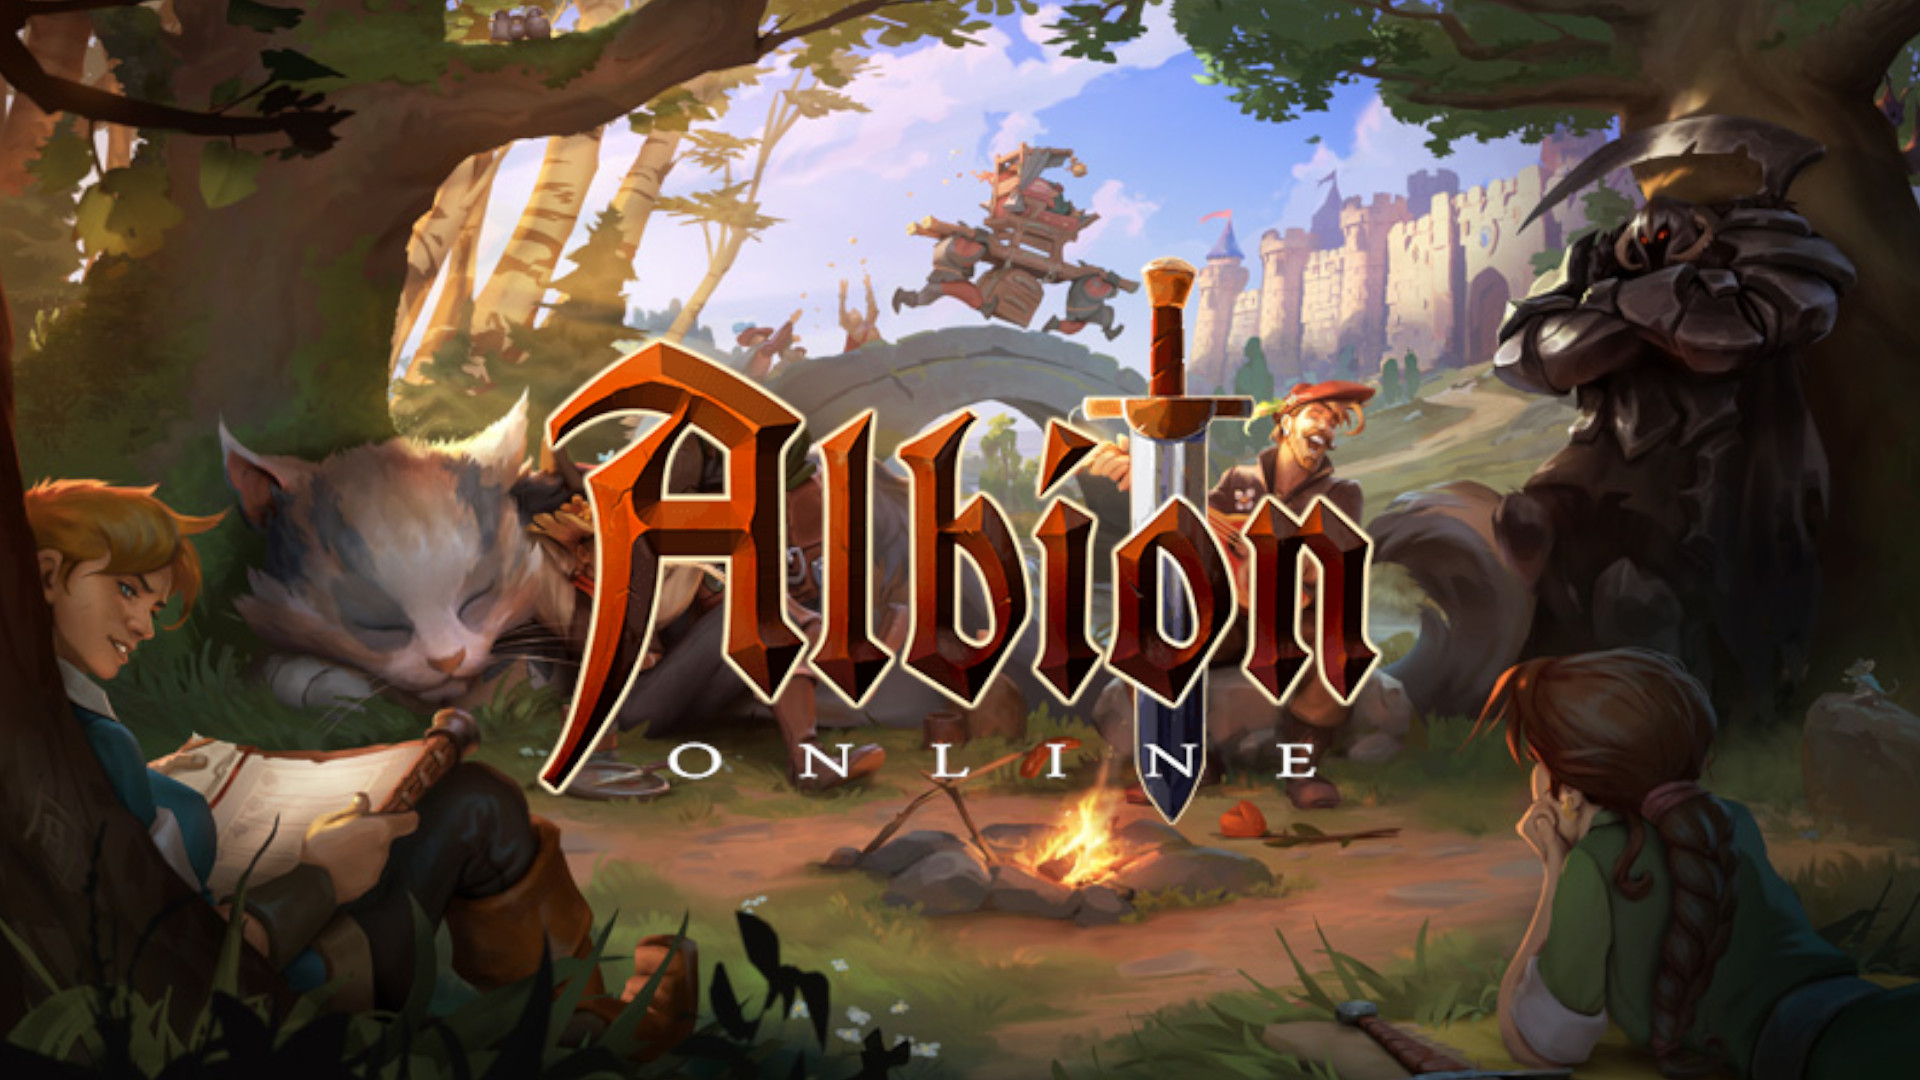 Albion Online “Paths to Glory”